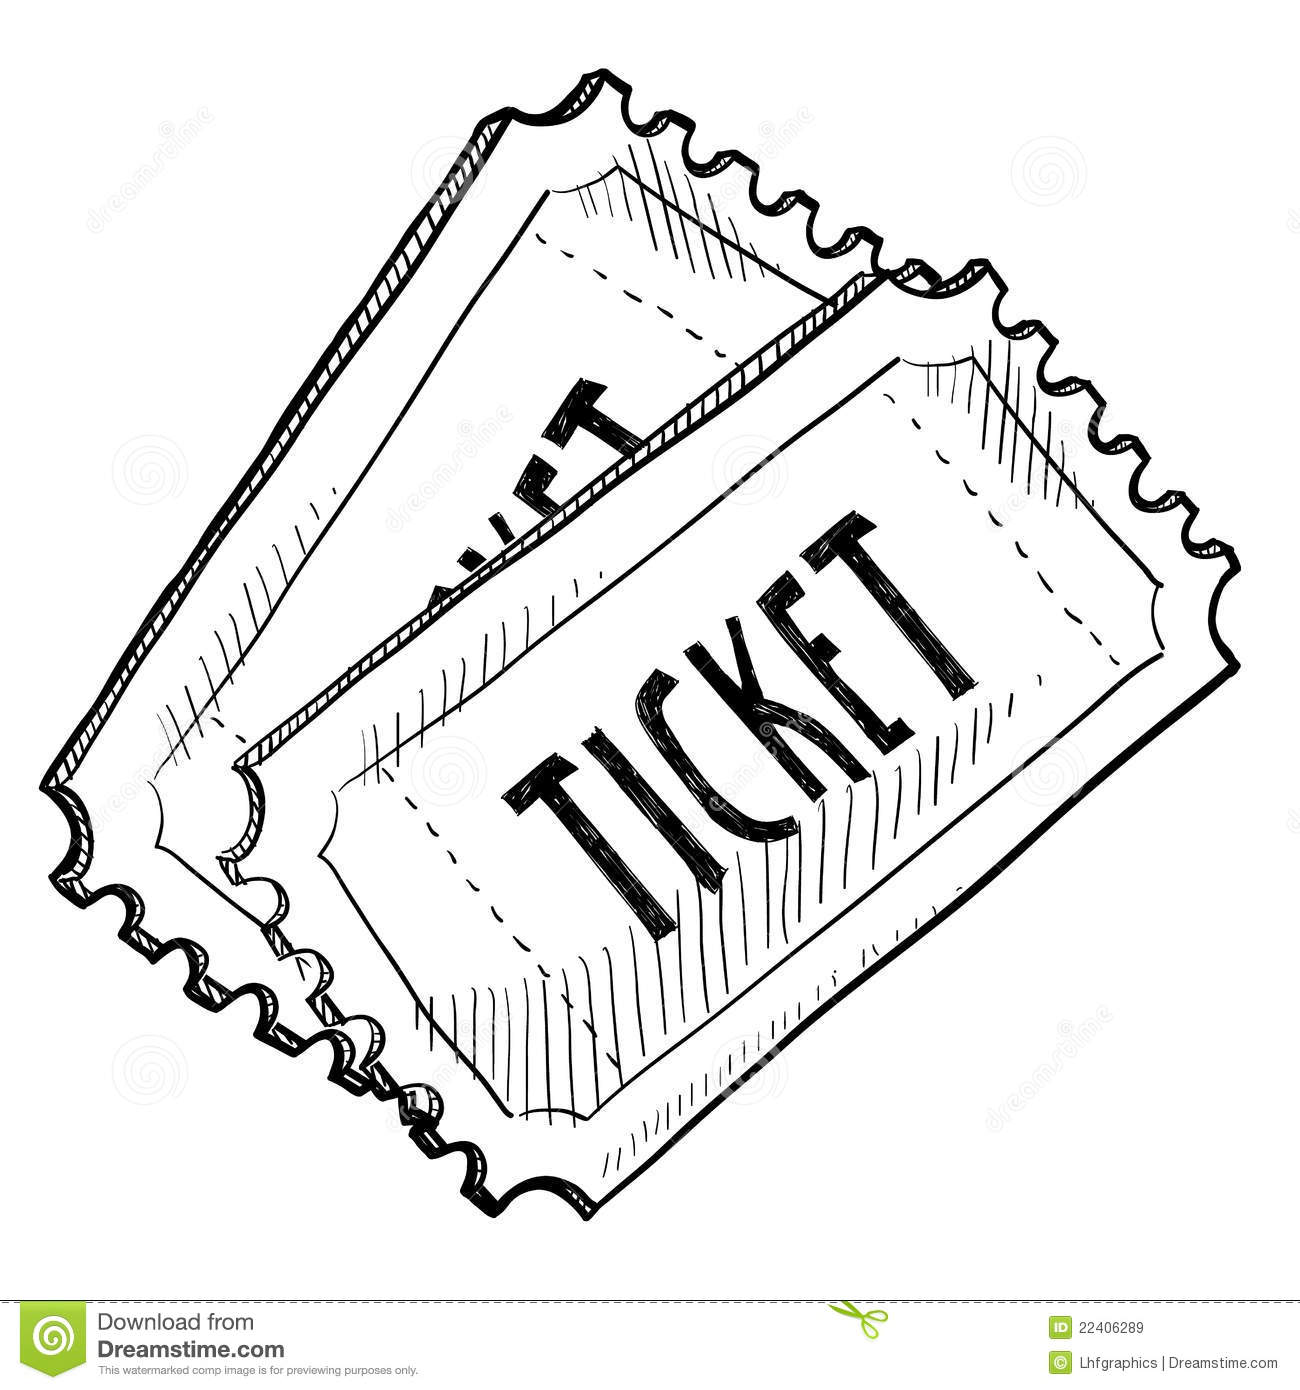 Concert or event ticket drawing Royalty Free Stock Images